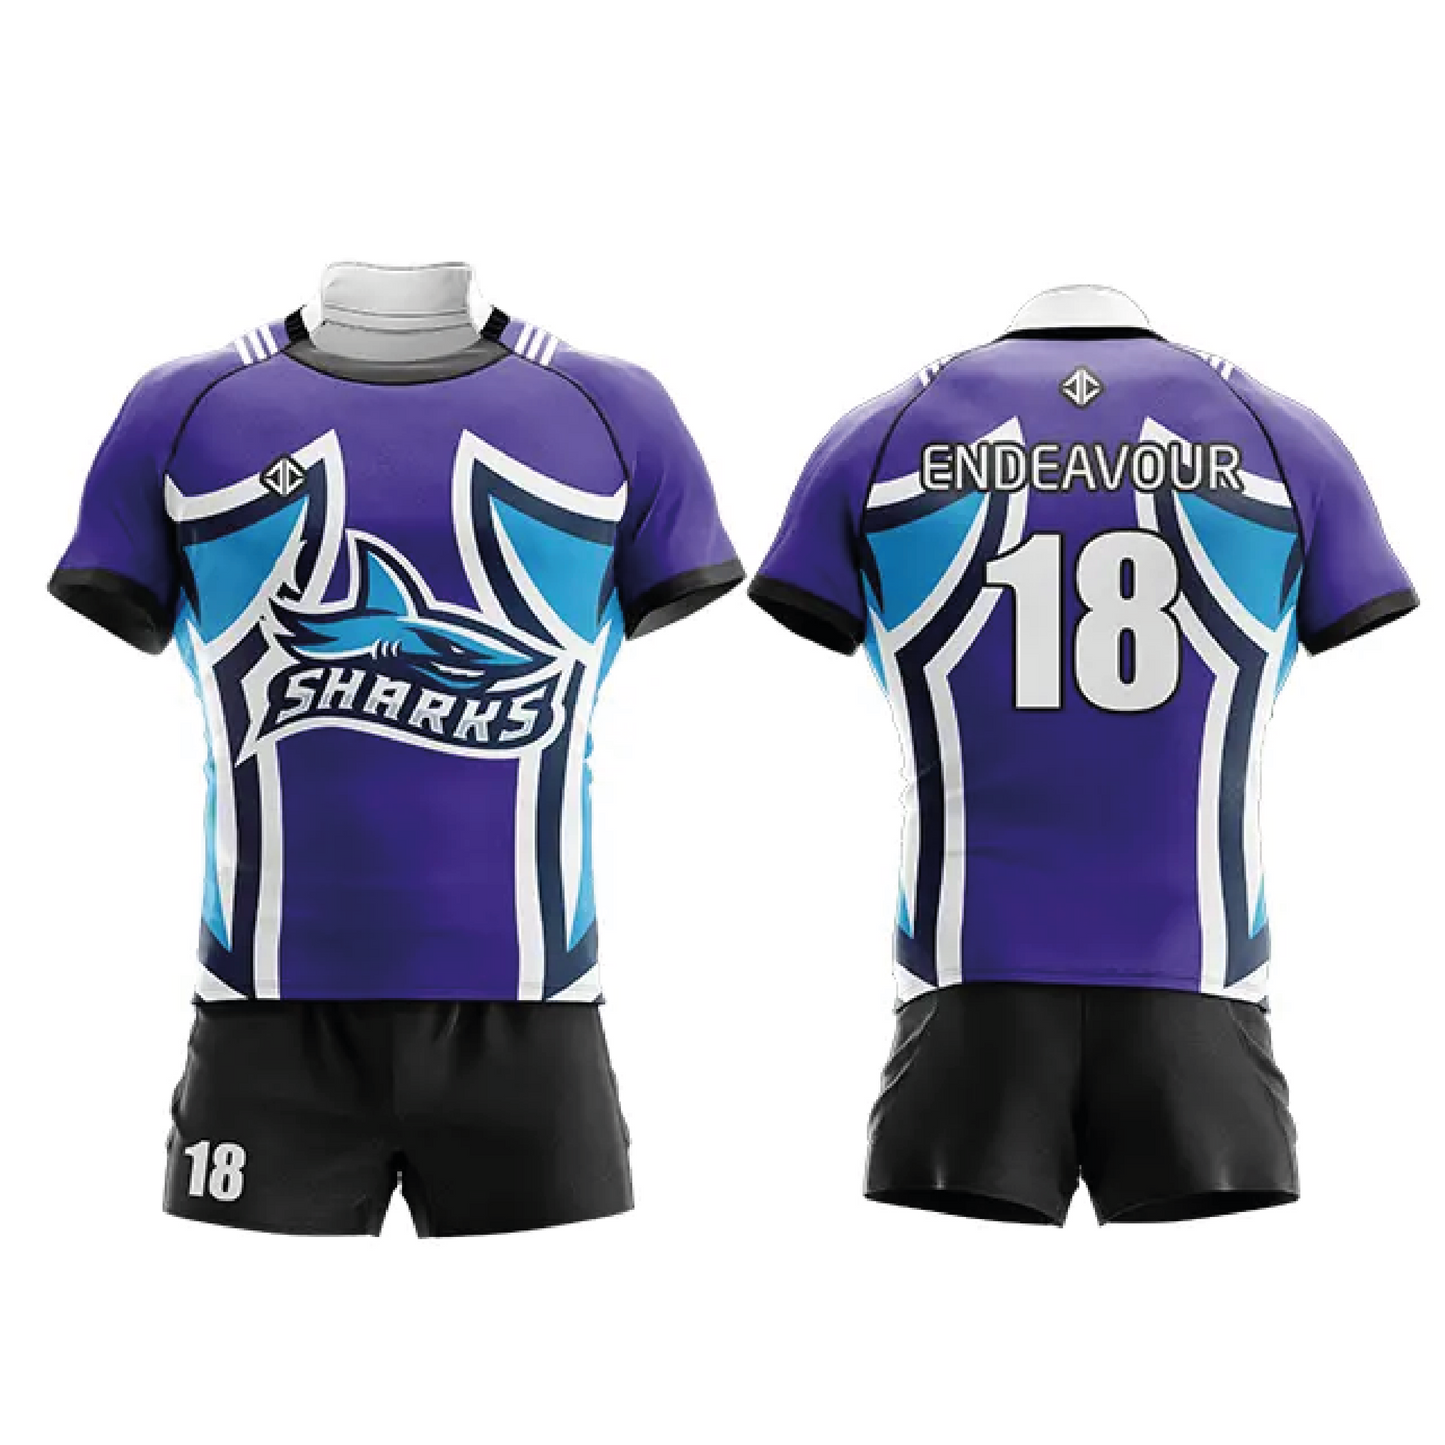 Adult Rugby Jersey